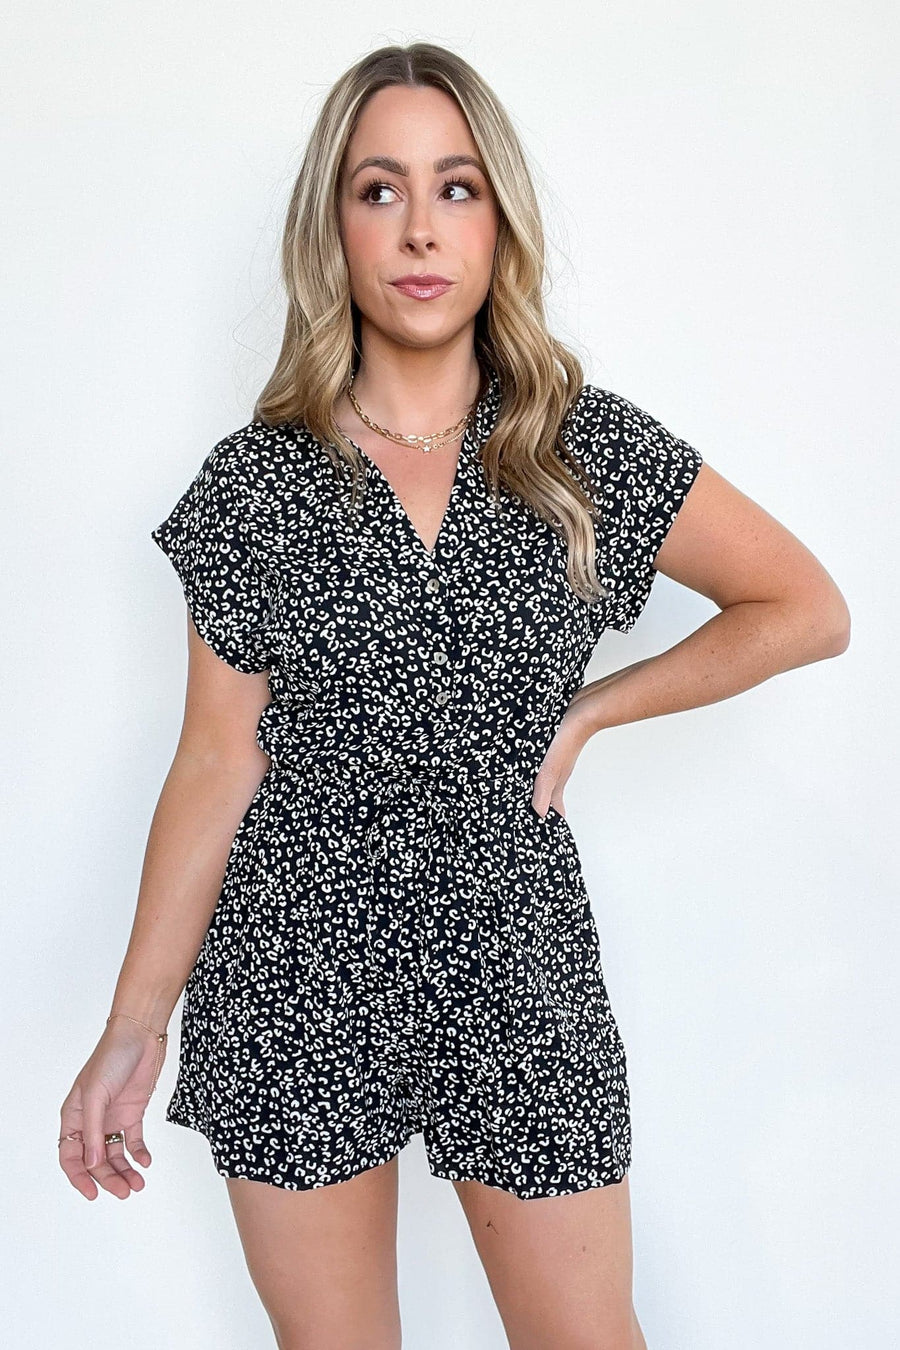  Cordell Animal Print Button Romper - FINAL SALE - Madison and Mallory